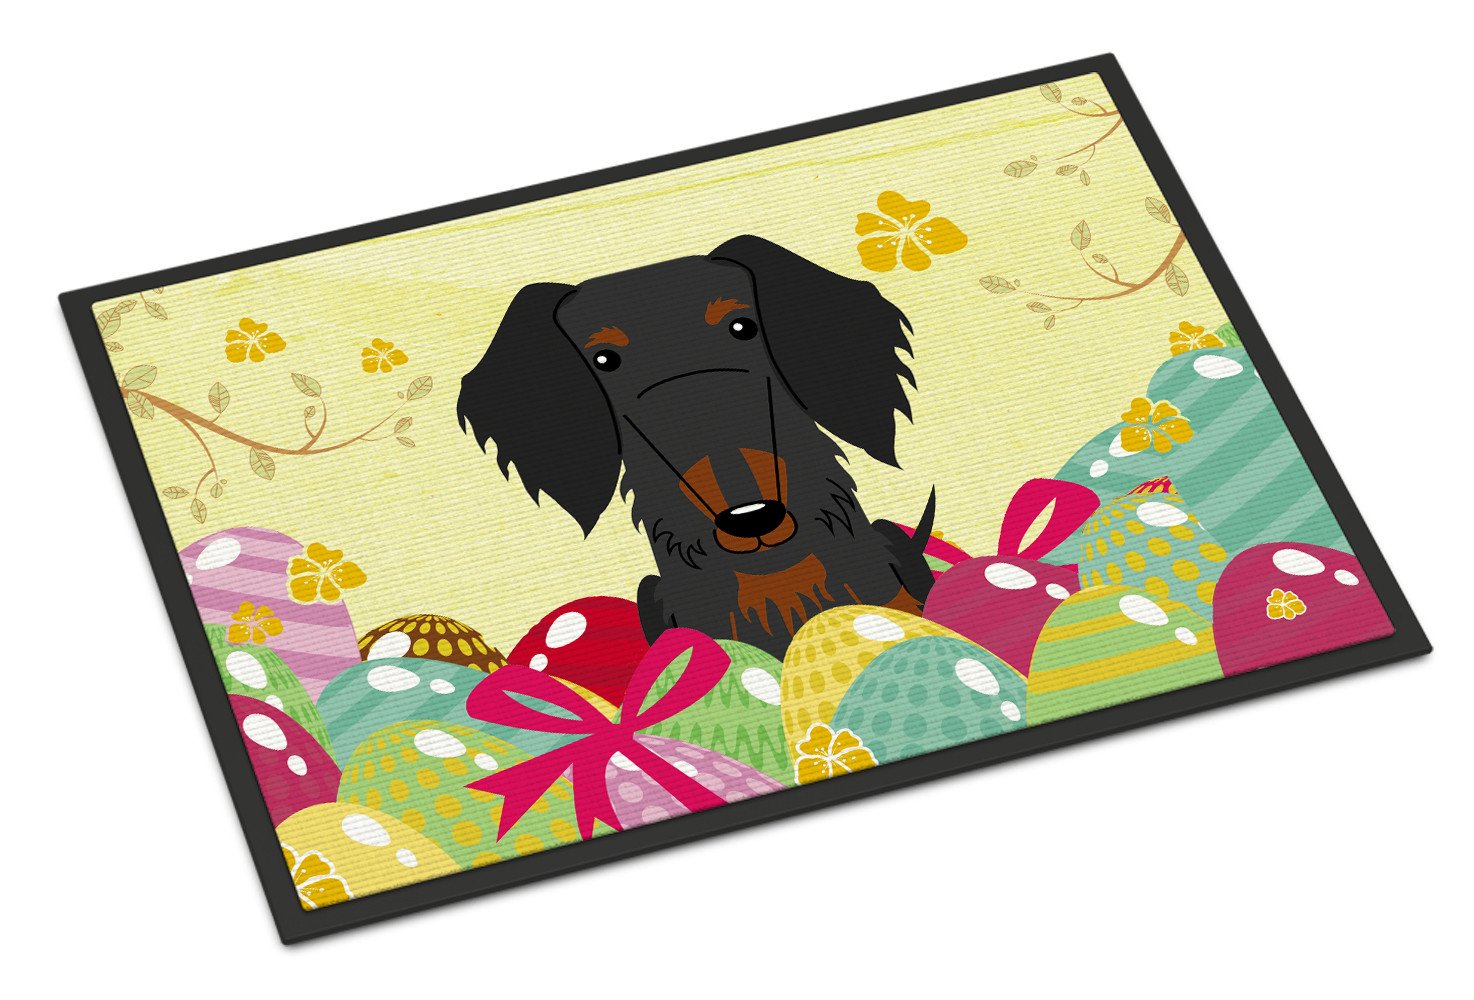 Easter Eggs Wire Haired Dachshund Black Tan Indoor or Outdoor Mat 24x36 BB6127JMAT by Caroline's Treasures